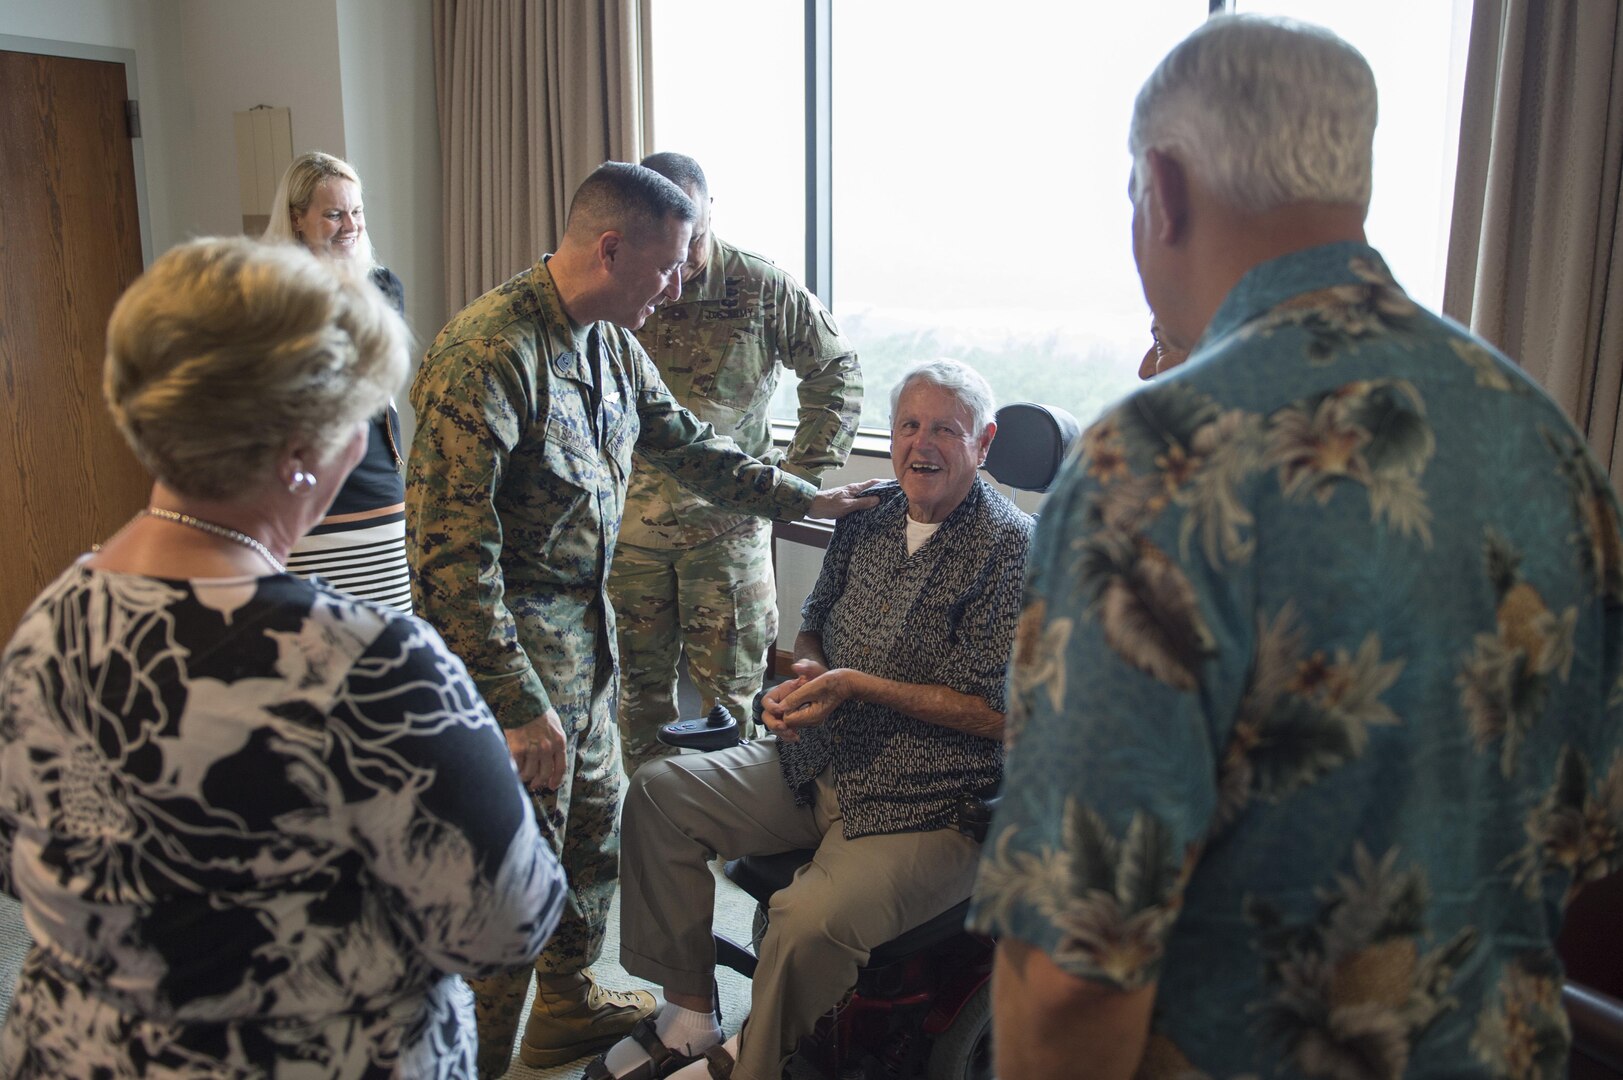 161208-N-DX698-014 CAMP H.M. SMITH, Hawaii (Dec. 8, 2016) U.S. Pacific Command, Senior Enlisted Leader, Sgt. Maj. Anthony A. Spadaro, center left, greets WWII and former POW veteran, Sgt. George Emerson and his wife during their visit to the PACOM headquarters. Emerson was invited on behalf of PACOM commander Adm. Harry Harris after he was unable to attend the official 75th Anniversary Commemoration on Dec. 7th in Pearl Harbor. Emerson served in the U.S. Army Air Corps and was captured by German forces when his plane was destroyed during an attack.  (U.S. Navy photo by Petty Officer 1st Class Jay M. Chu/Released)